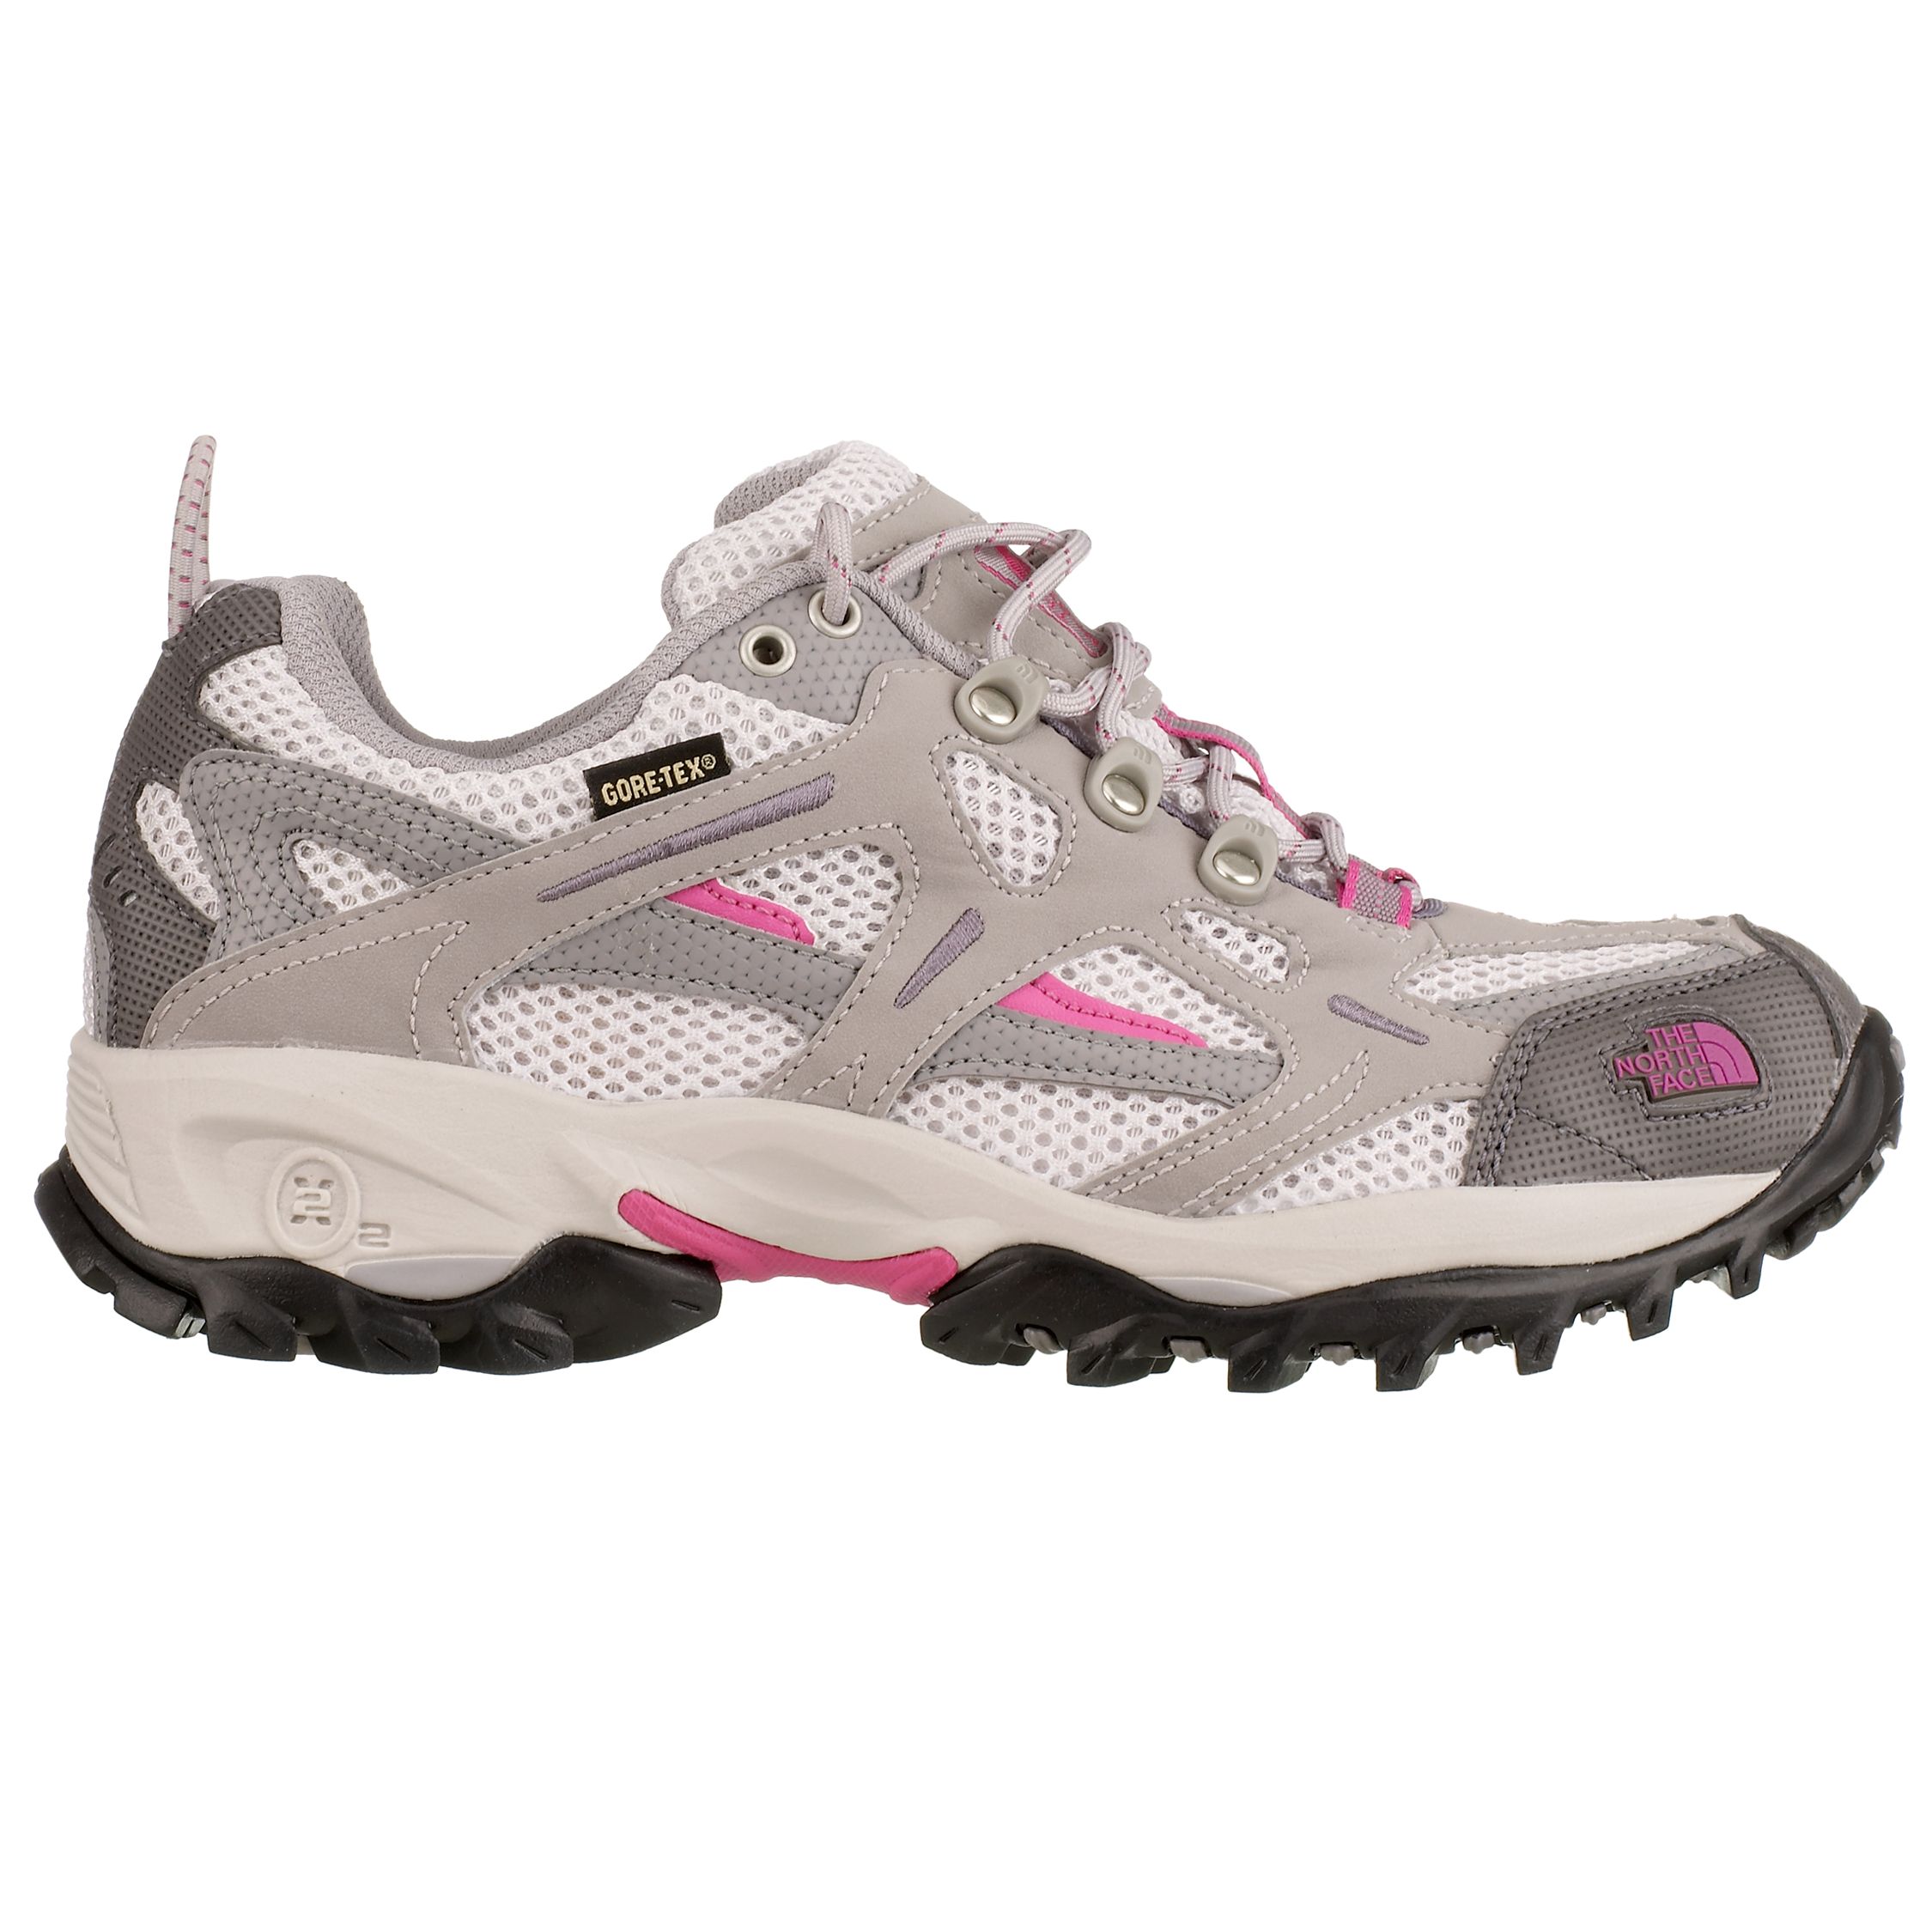 The North Face Waterproof Trail Shoes, Grey/Pink